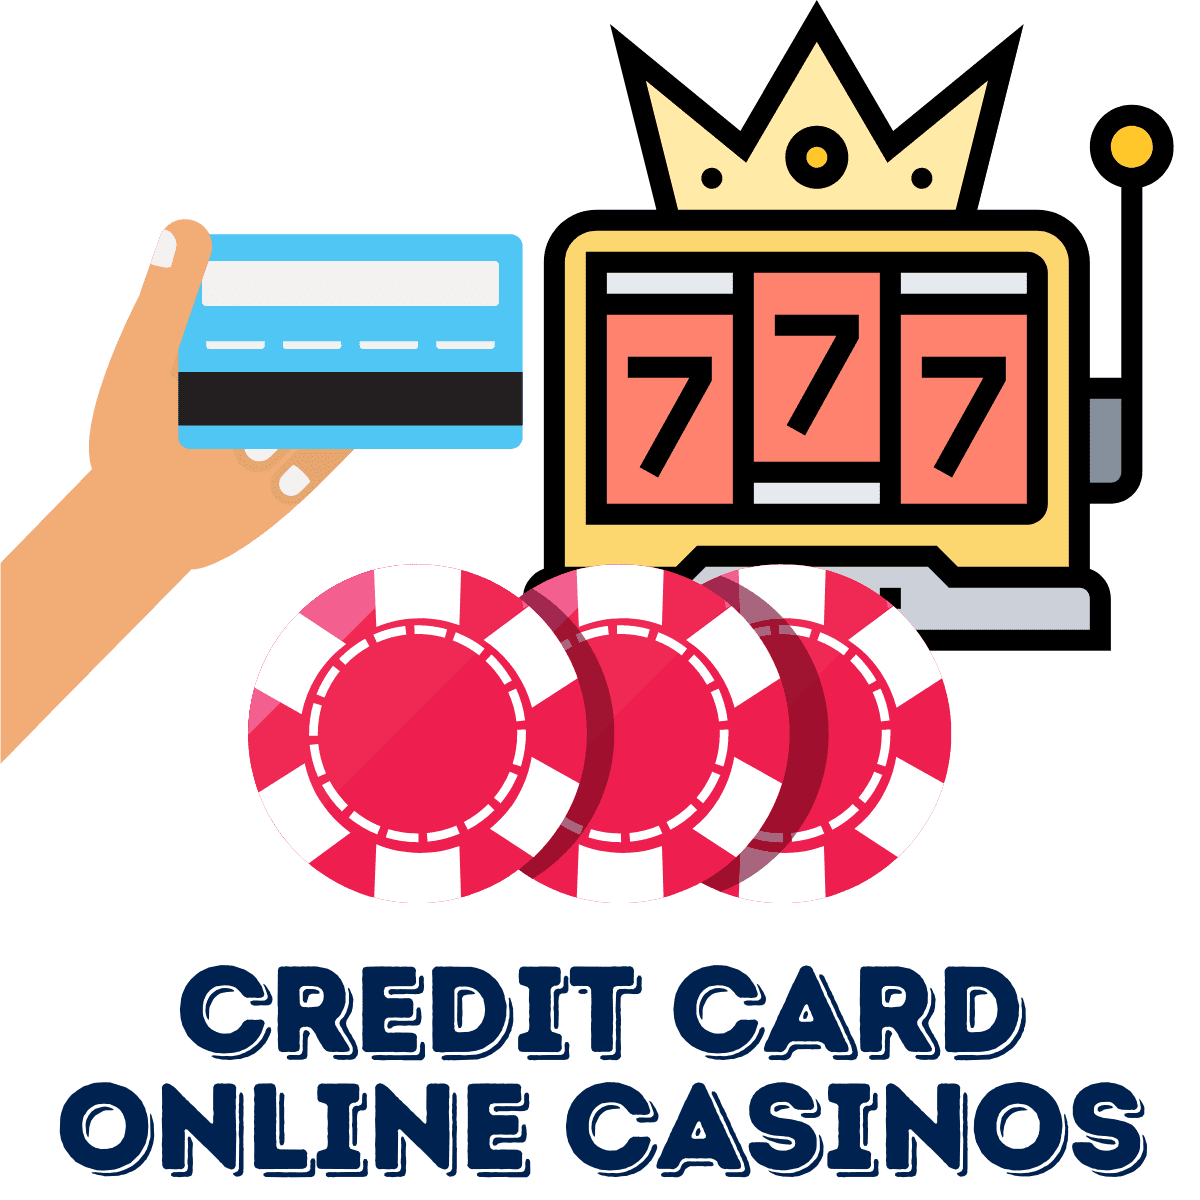 Casinos That Accept Credit Cards - Casinos Not On Gamstop